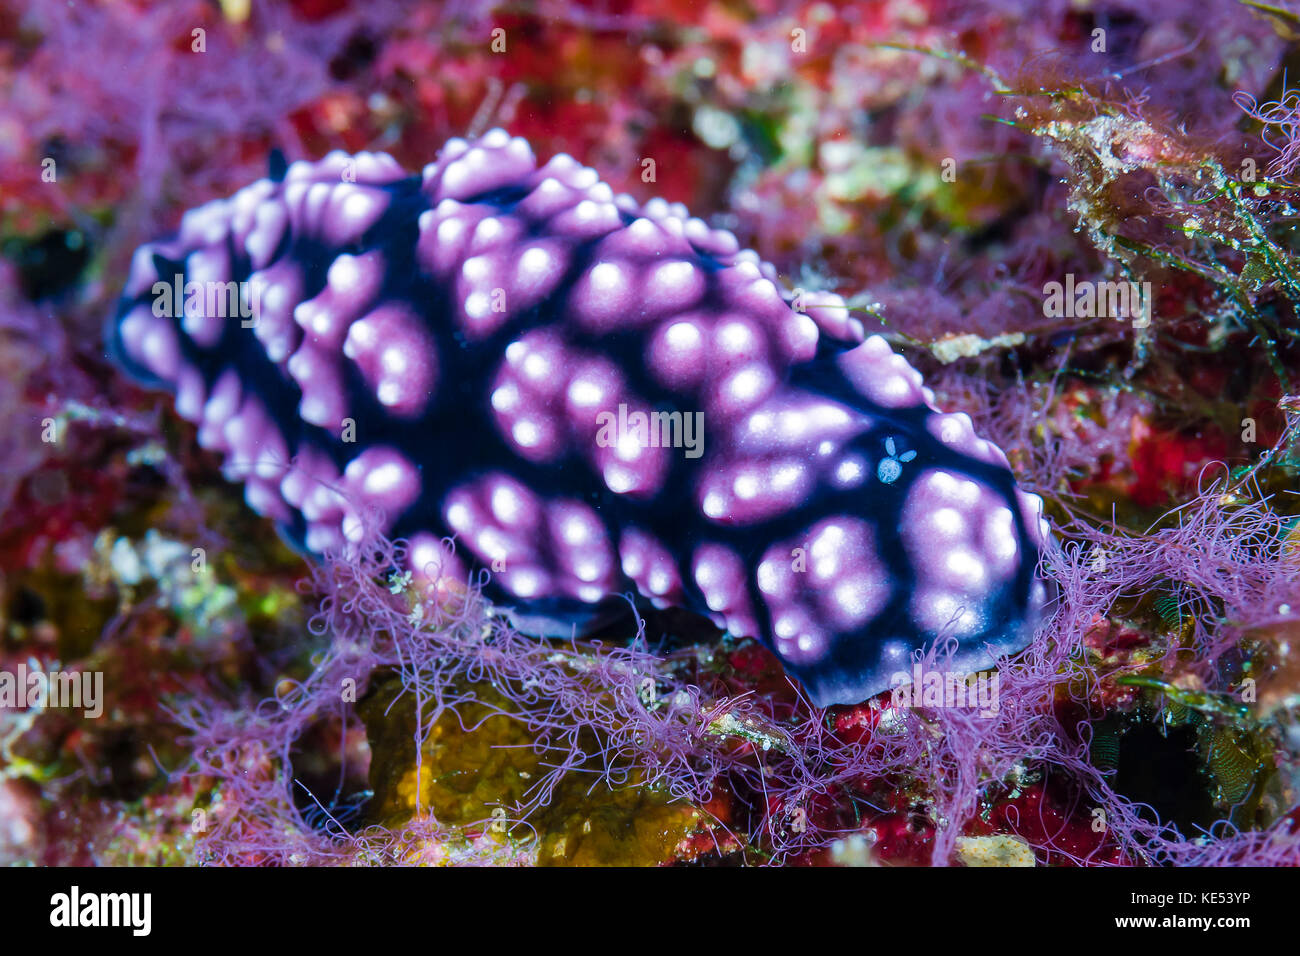 Pimpled Phyllidiella nudibranch with isopod. Stock Photo